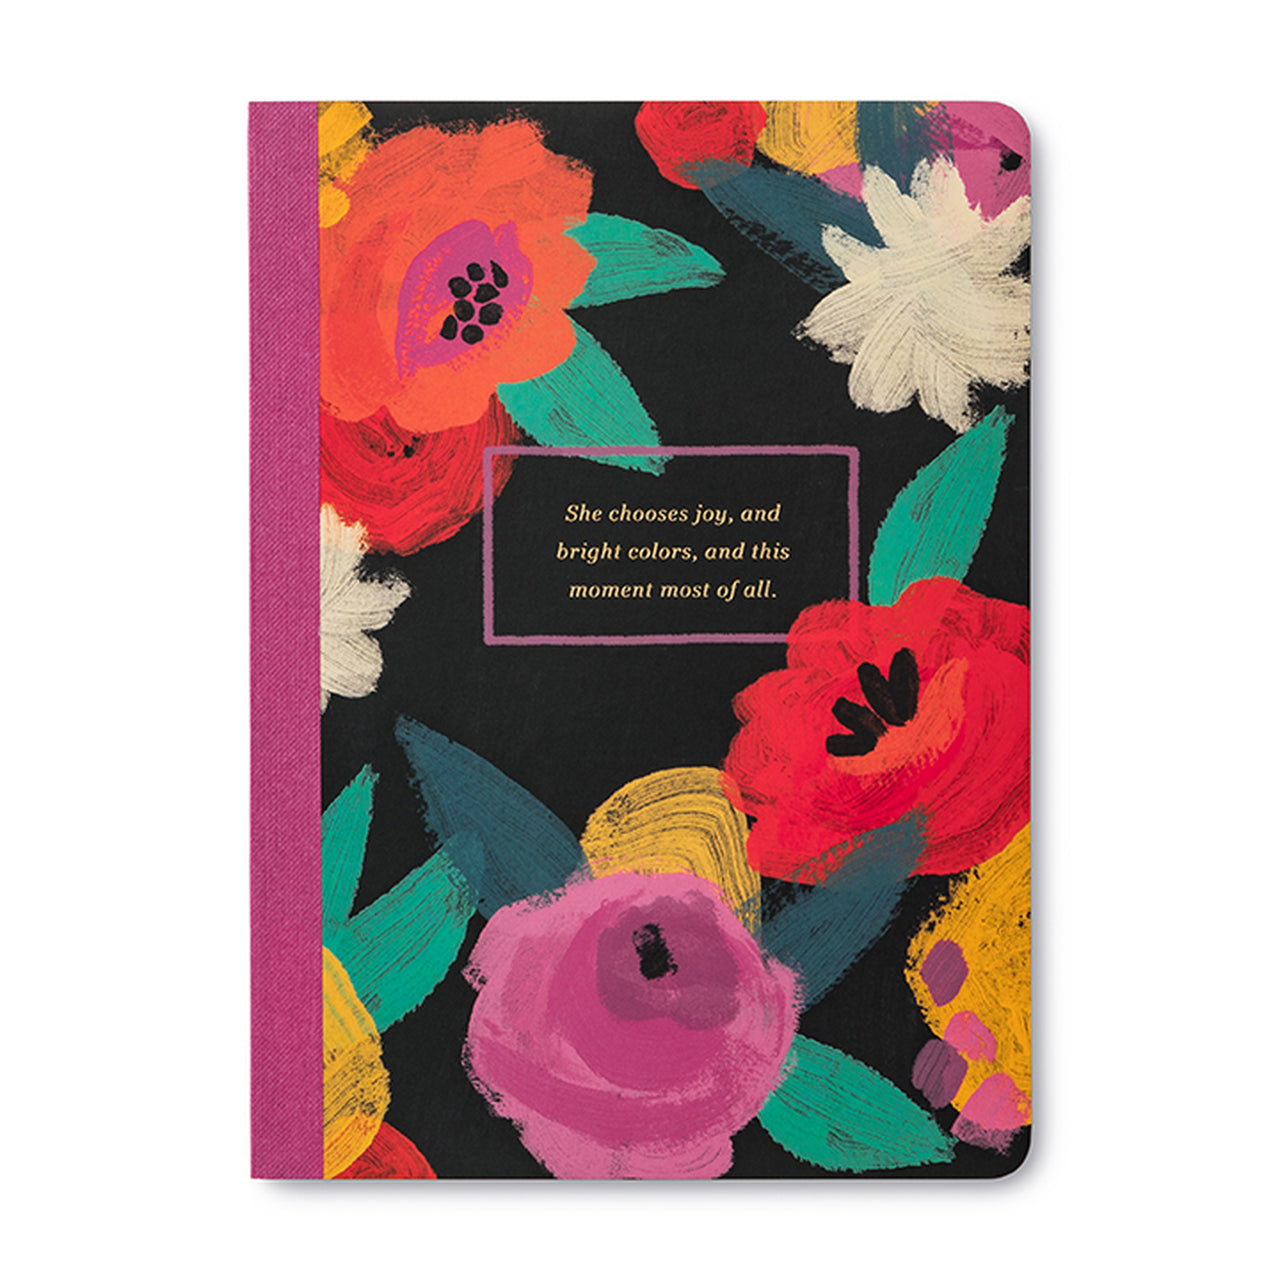 Her Words Journal - Several Styles